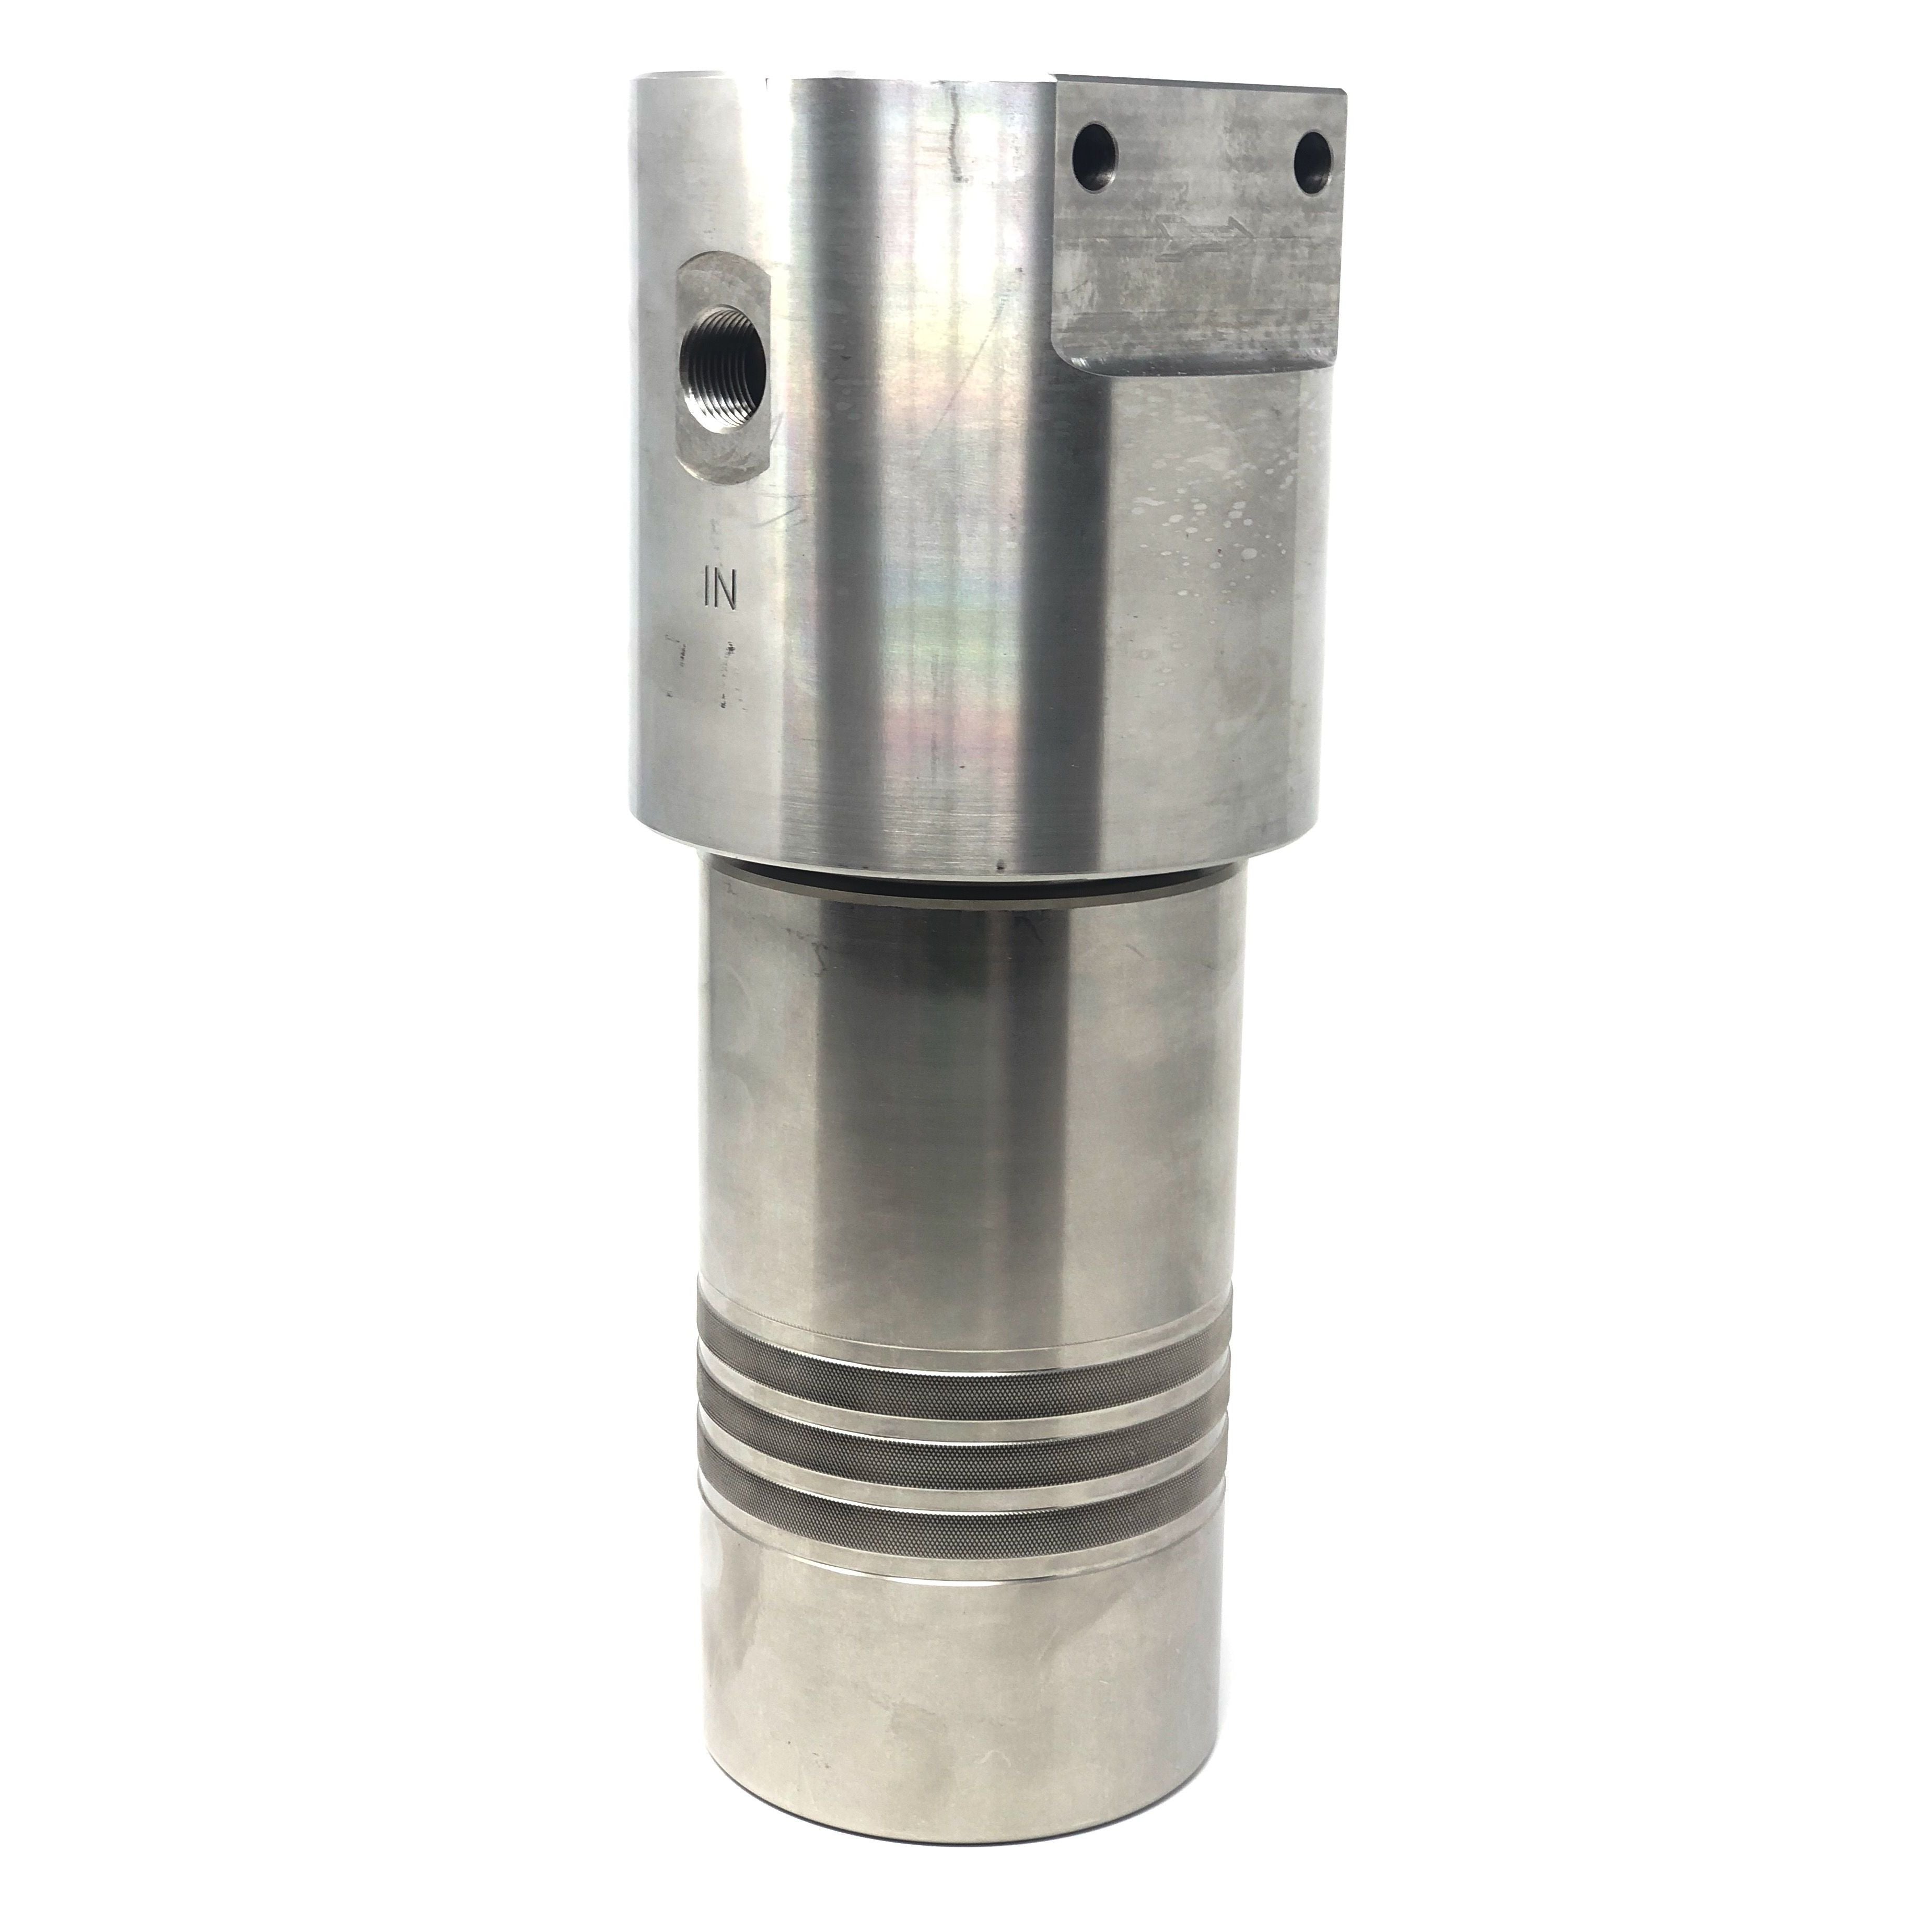 52S-244S-3MDN : Chase Ultra High Pressure Inline Filter, 10000psi, #4 SAE (1/4"), 3 Micron, With Visual Indicator, No Bypass